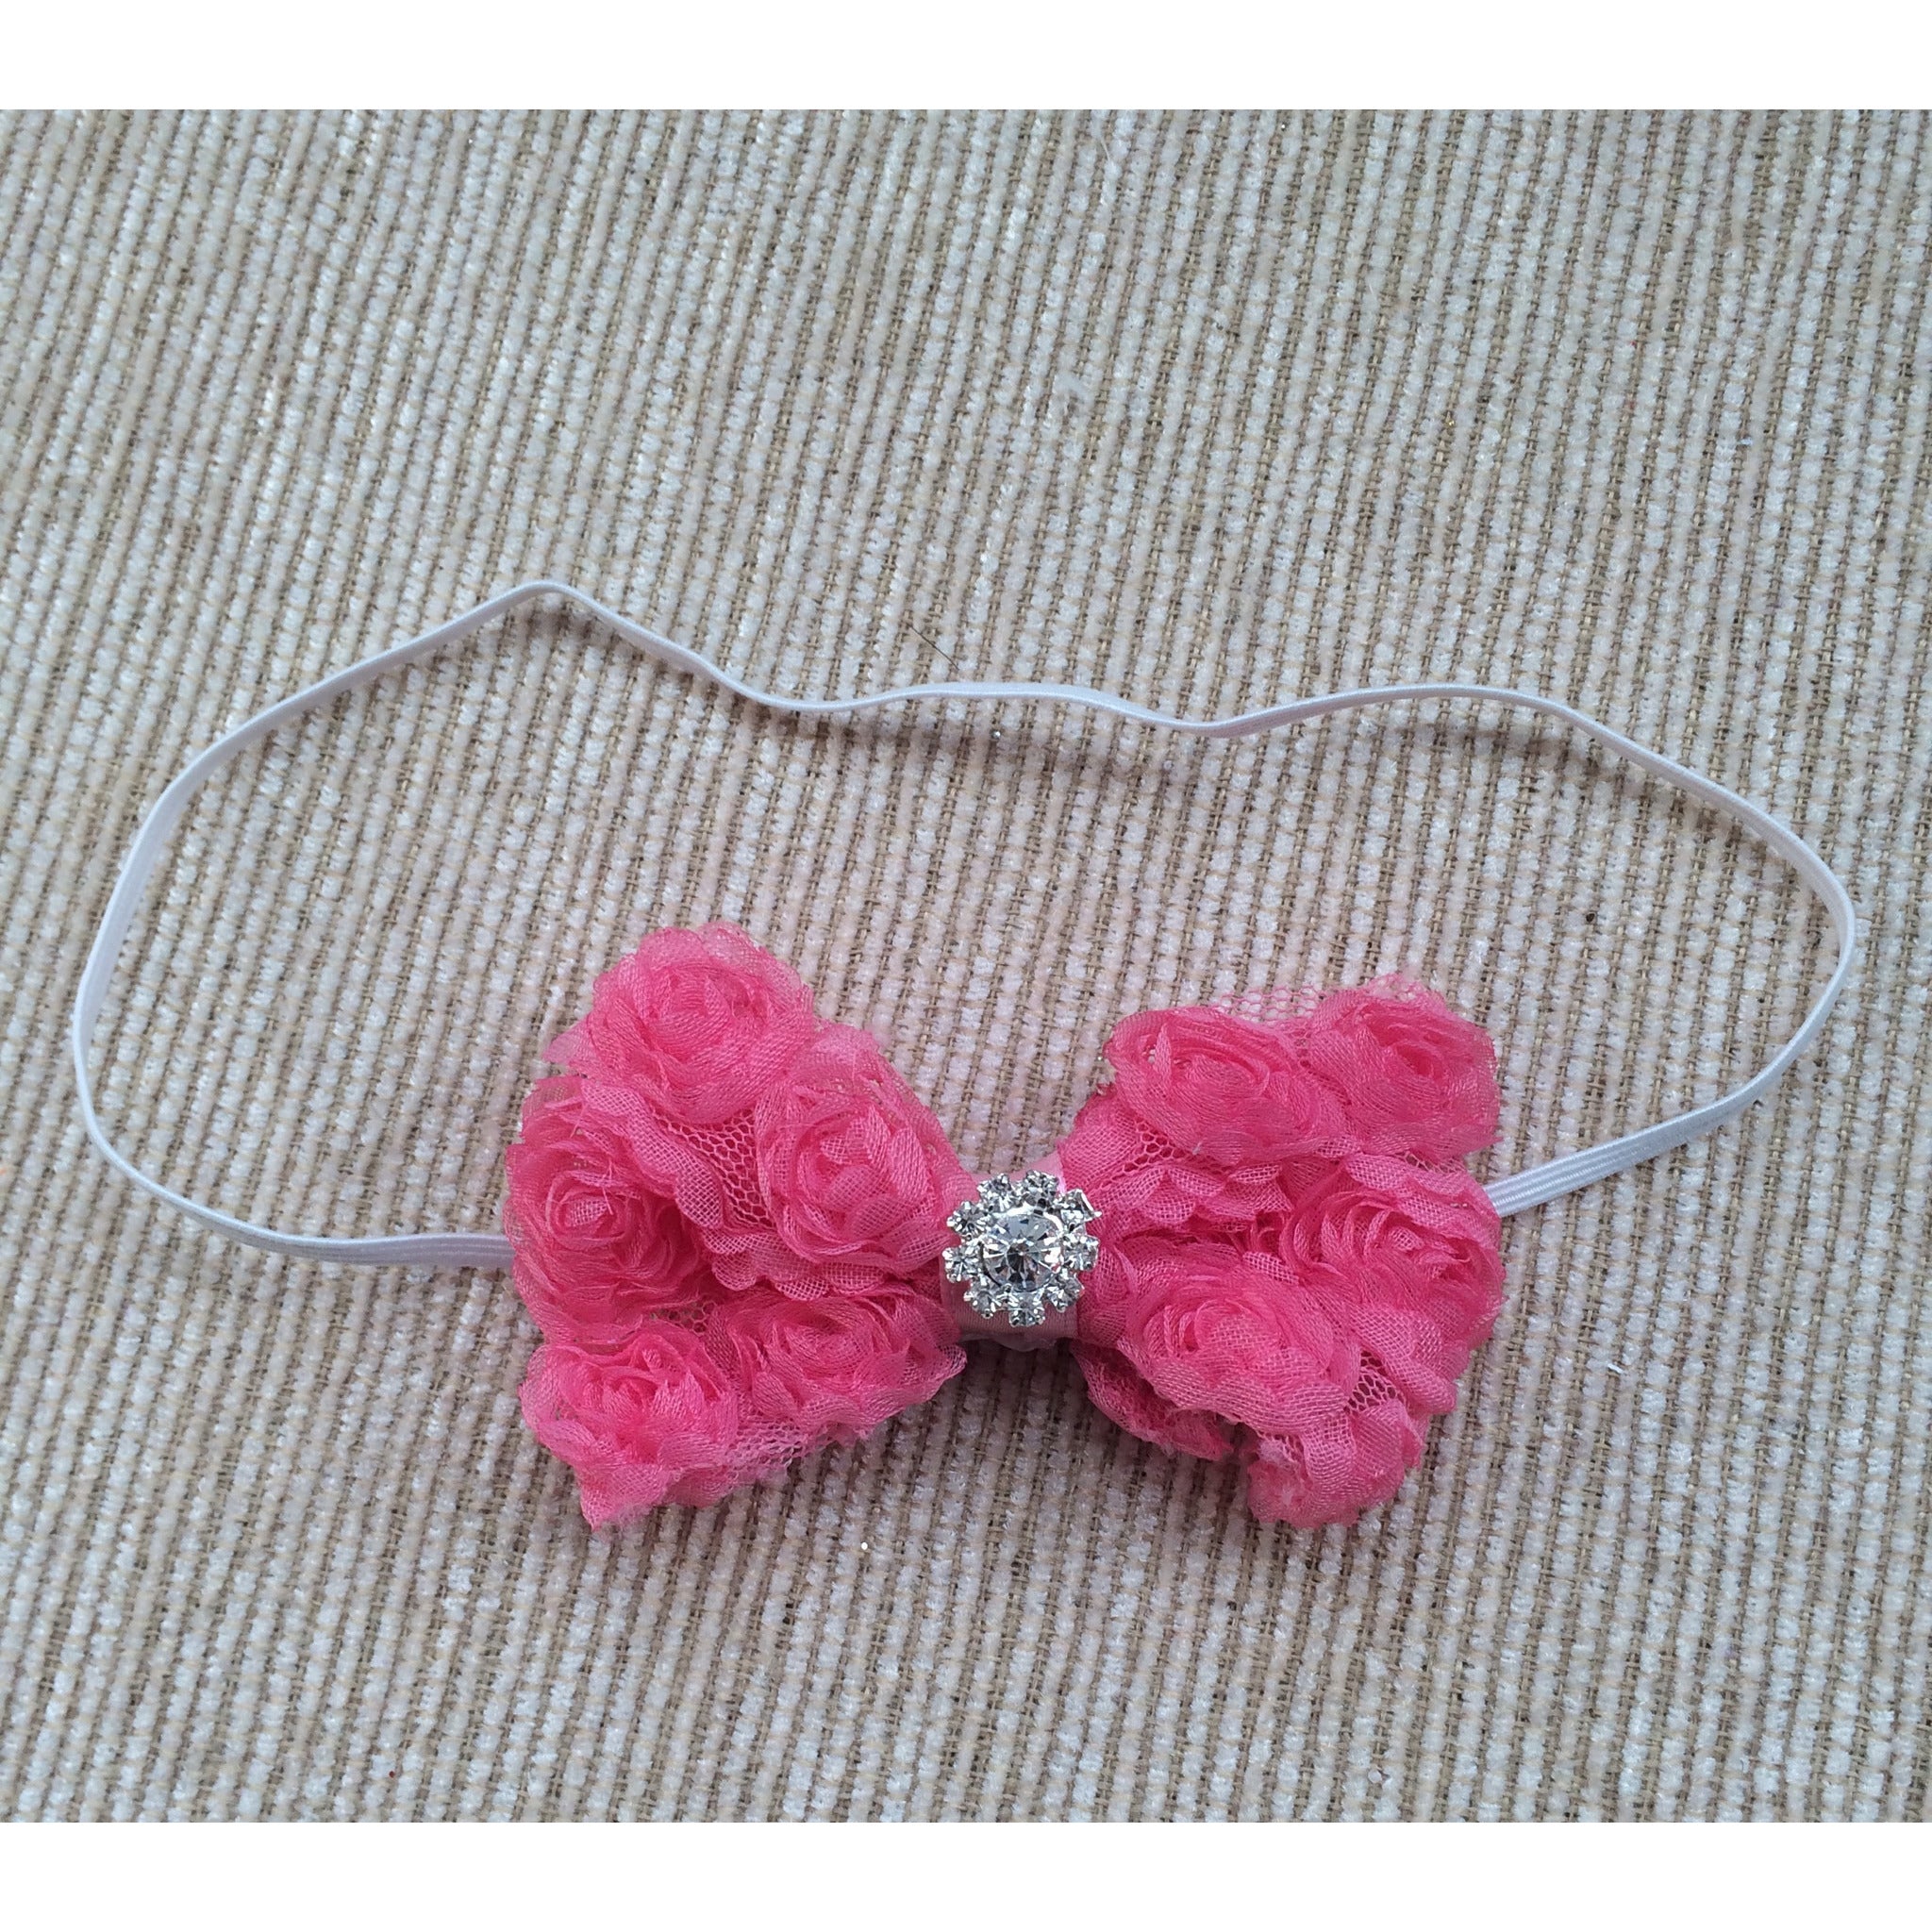 Rosette Baby Headband- pick your color!